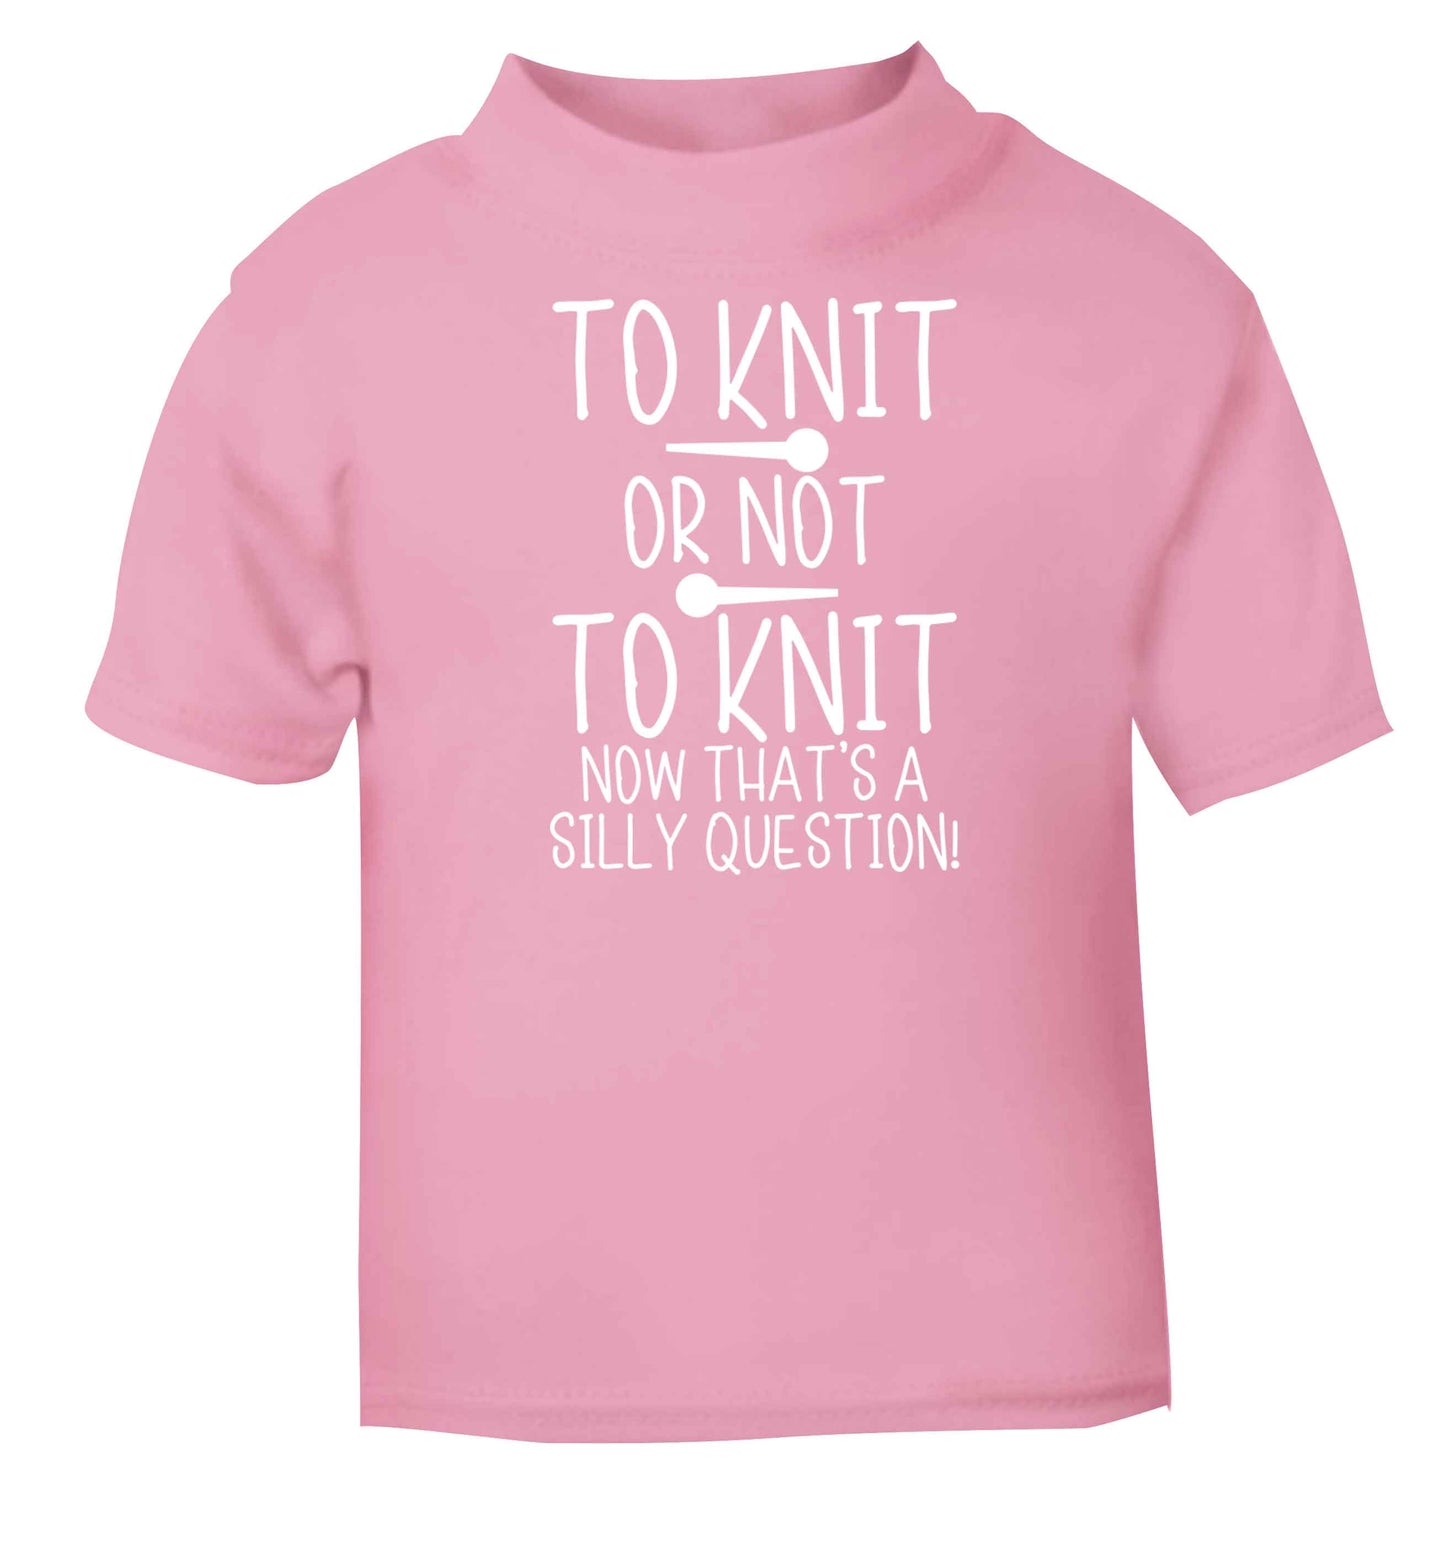 To knit or not to knit now that's a silly question light pink baby toddler Tshirt 2 Years